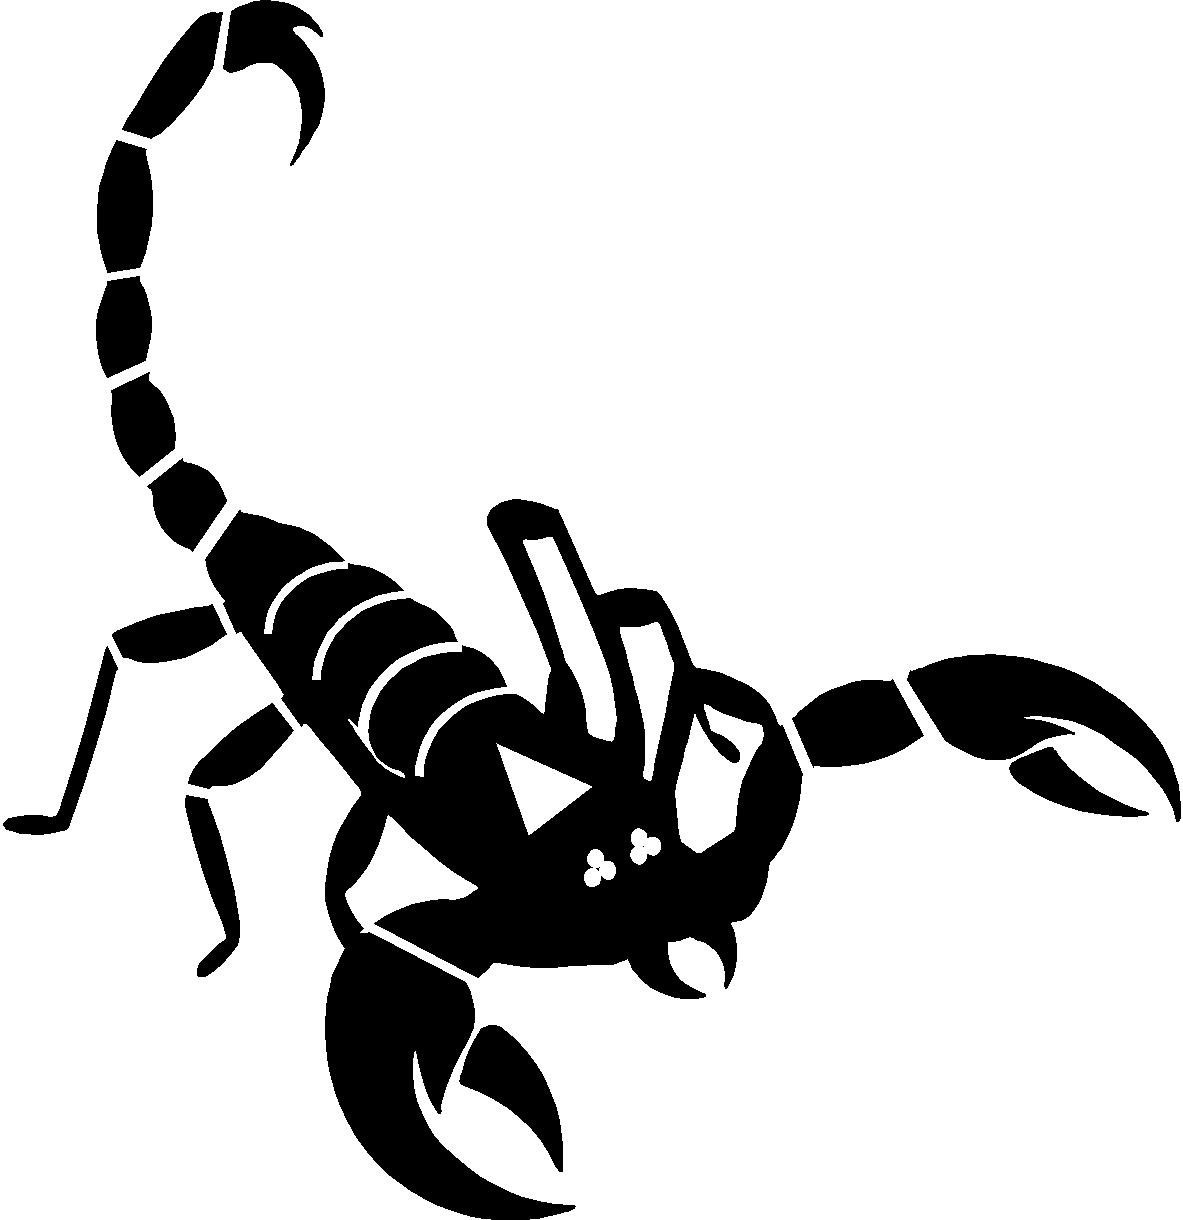 Scorpion Drawings Free - ClipArt Best